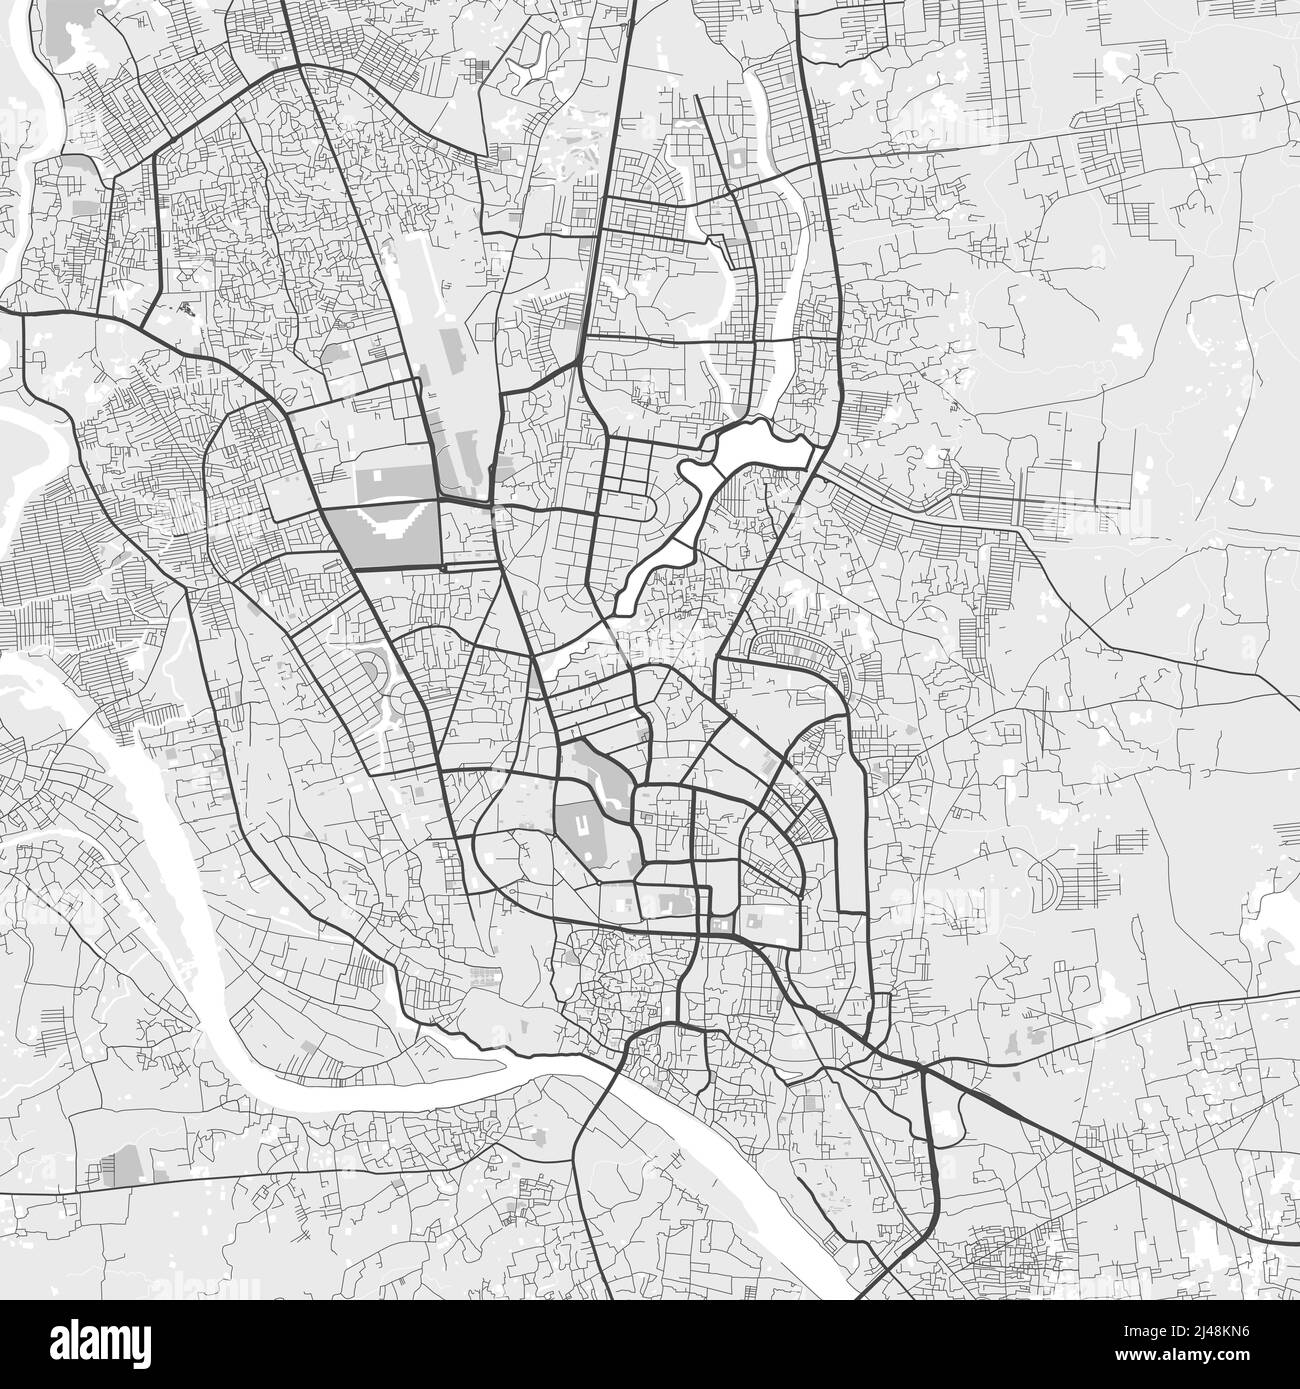 Urban city map of Dhaka. Vector illustration, Dhaka map grayscale art poster. Street map image with roads, metropolitan city area view. Stock Vector